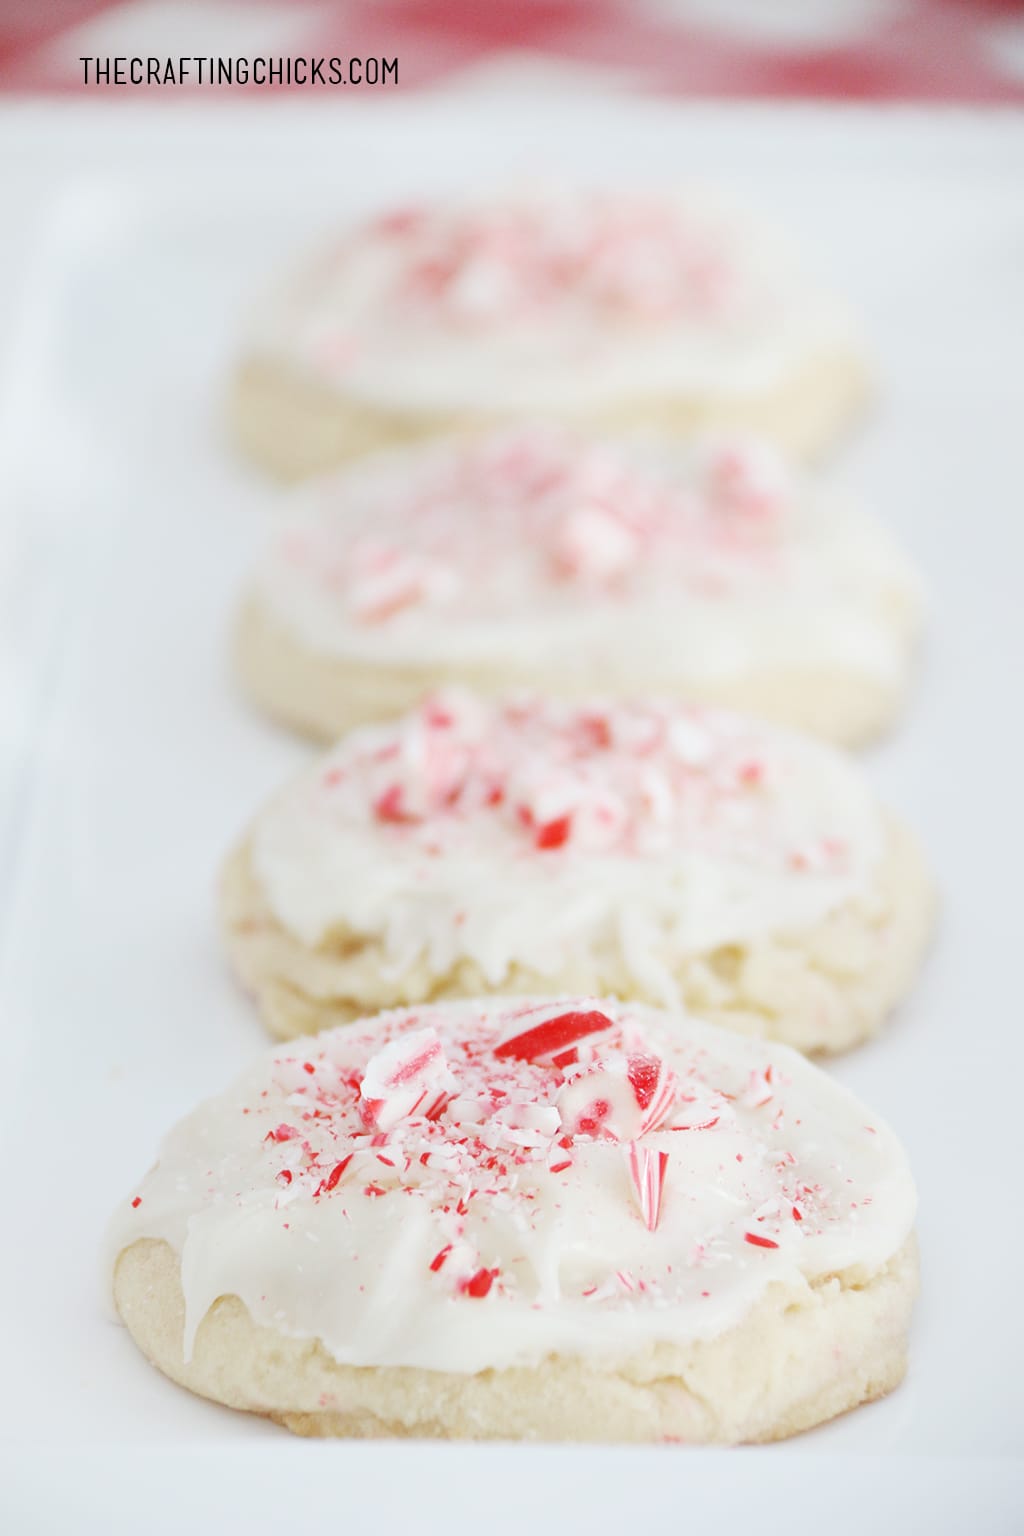 Candy Cane Sugar Cookies do not disappoint. They are full of peppermint flavor and a fun little crunch from the Candy Canes.